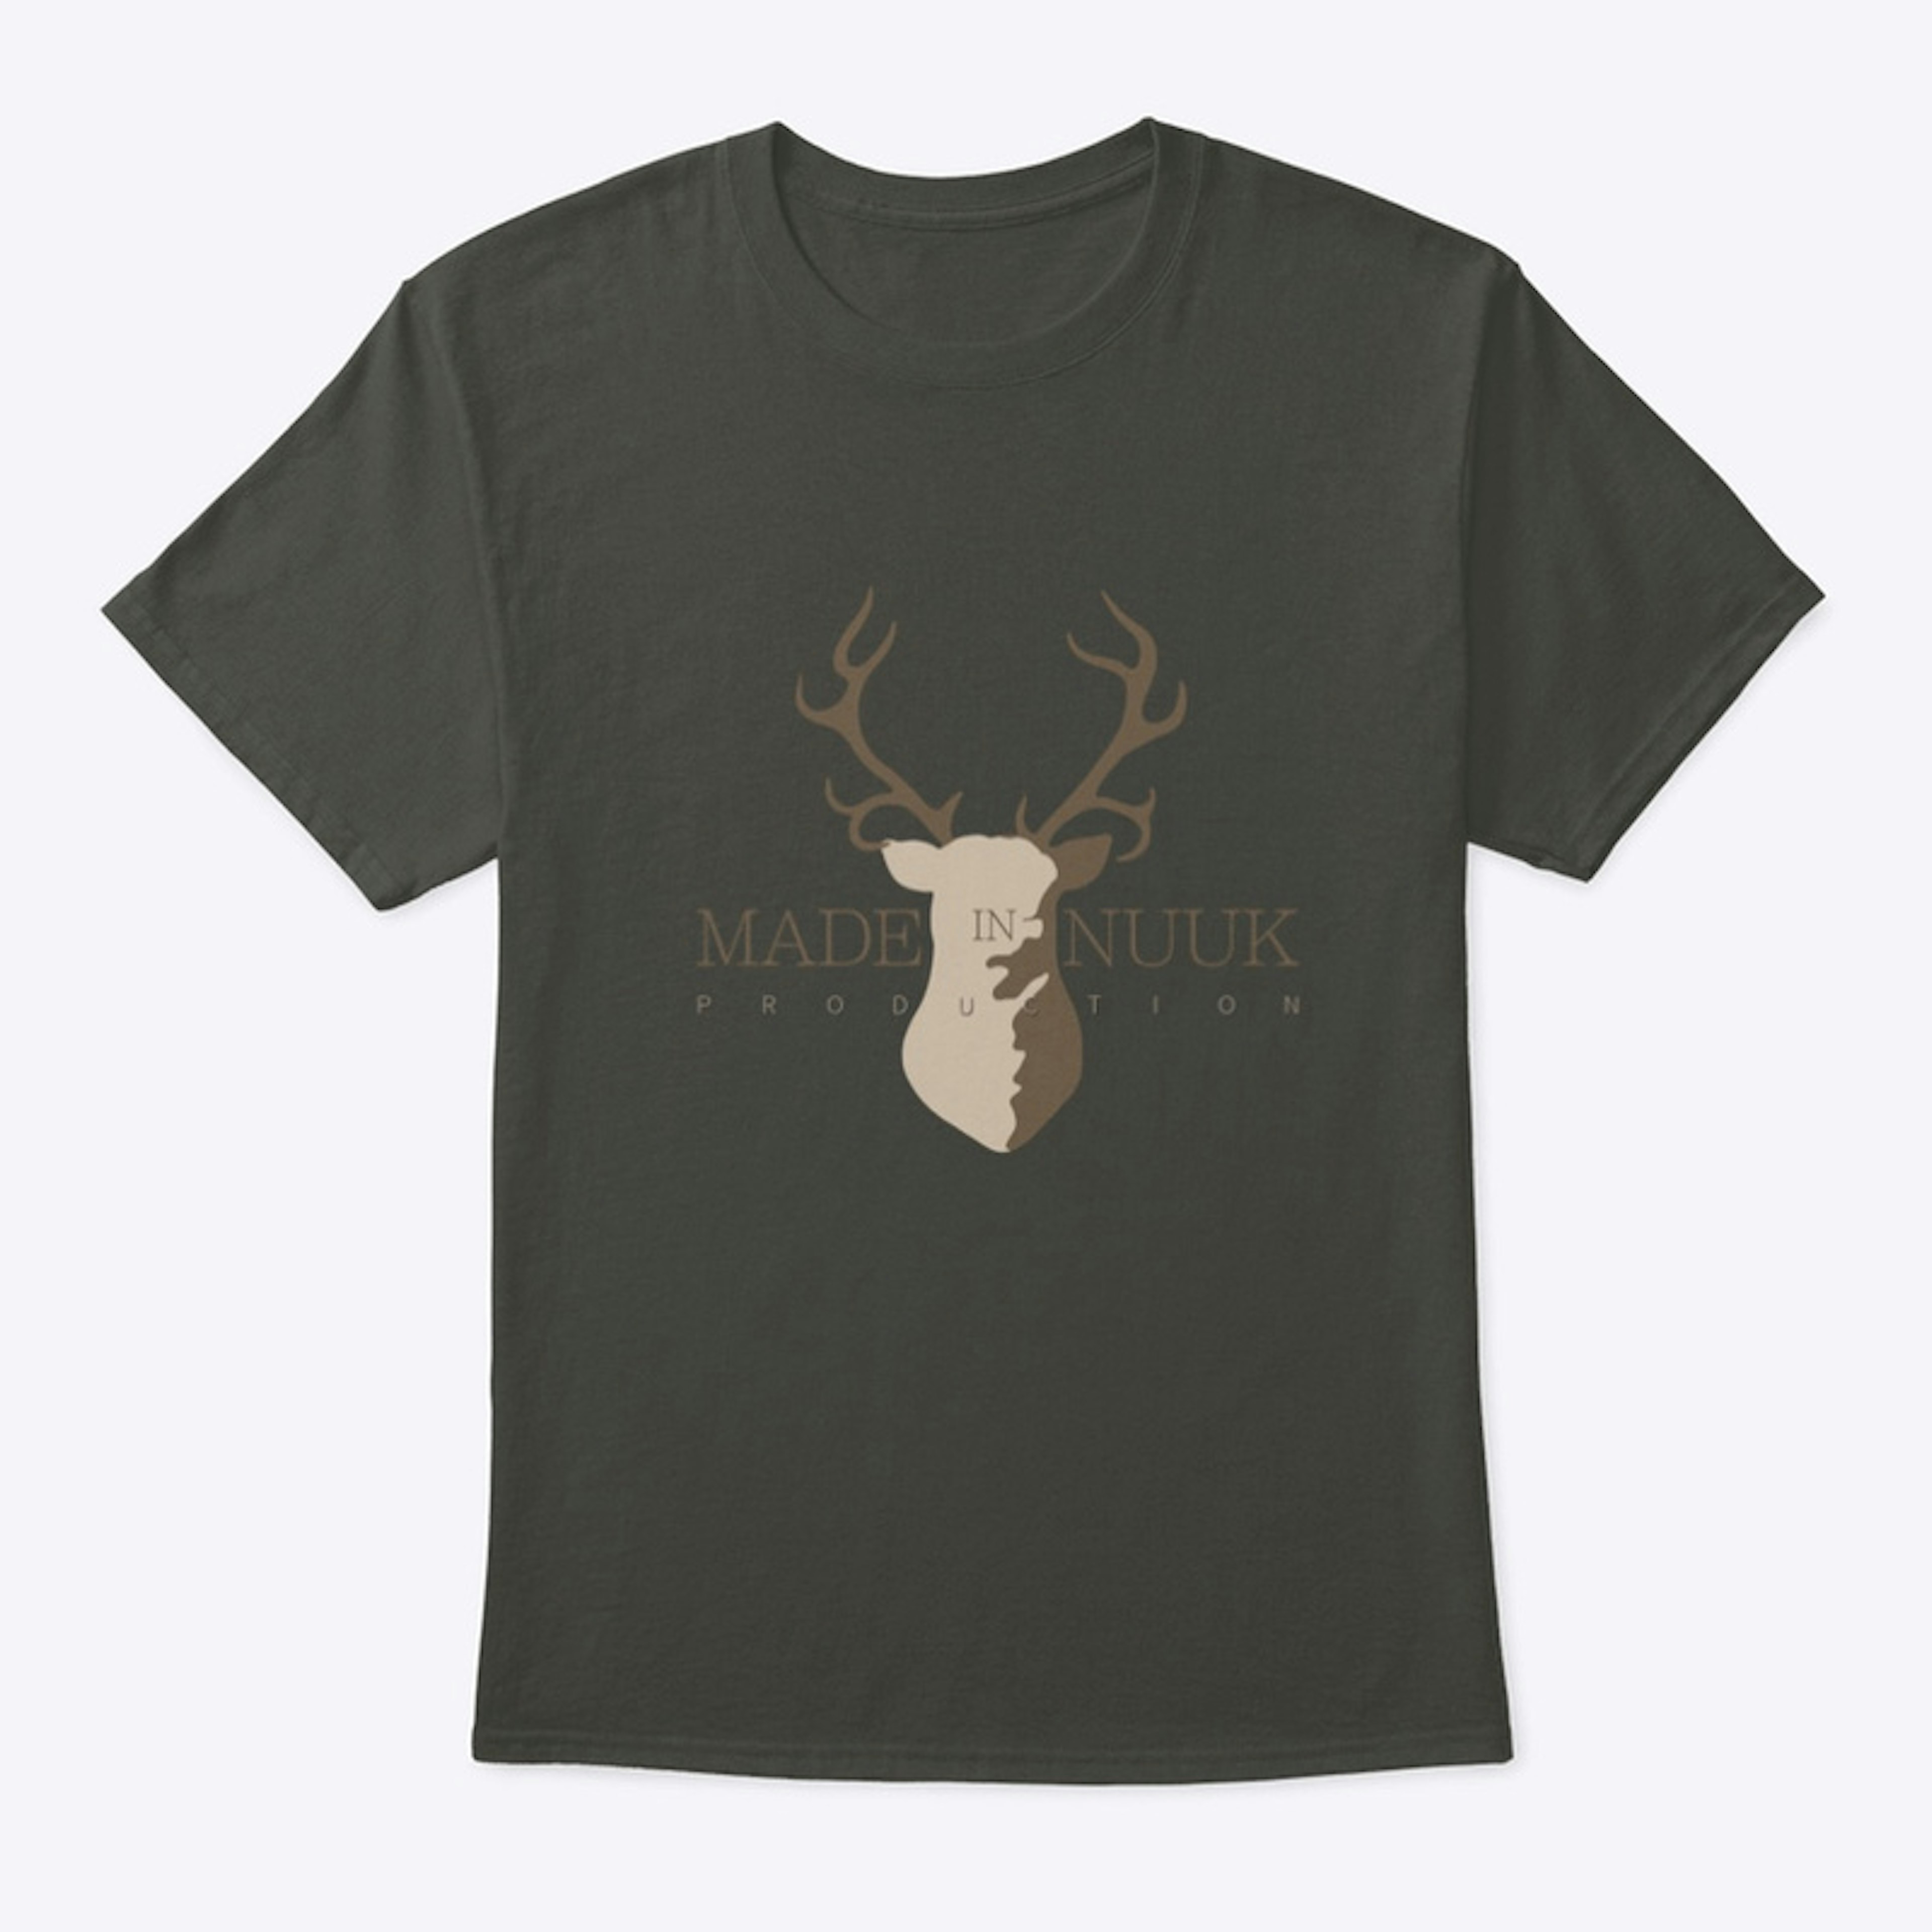 Made in Nuuk production T-Shirt